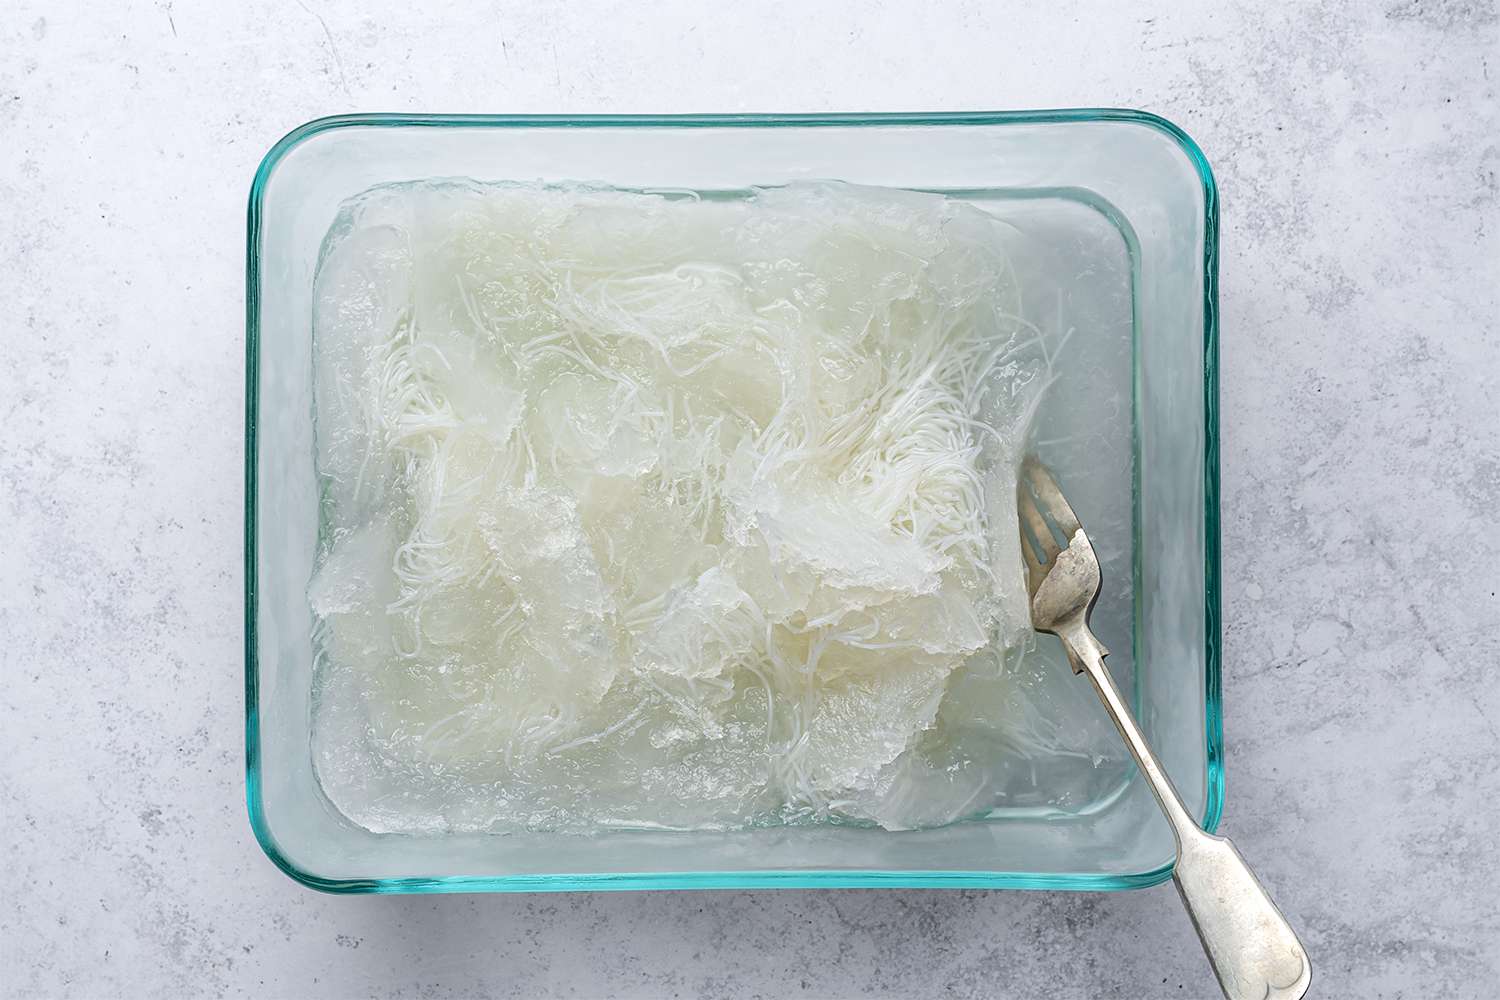 Frozen syrup and rice noodle mixture in a baking dish, with a spoon 